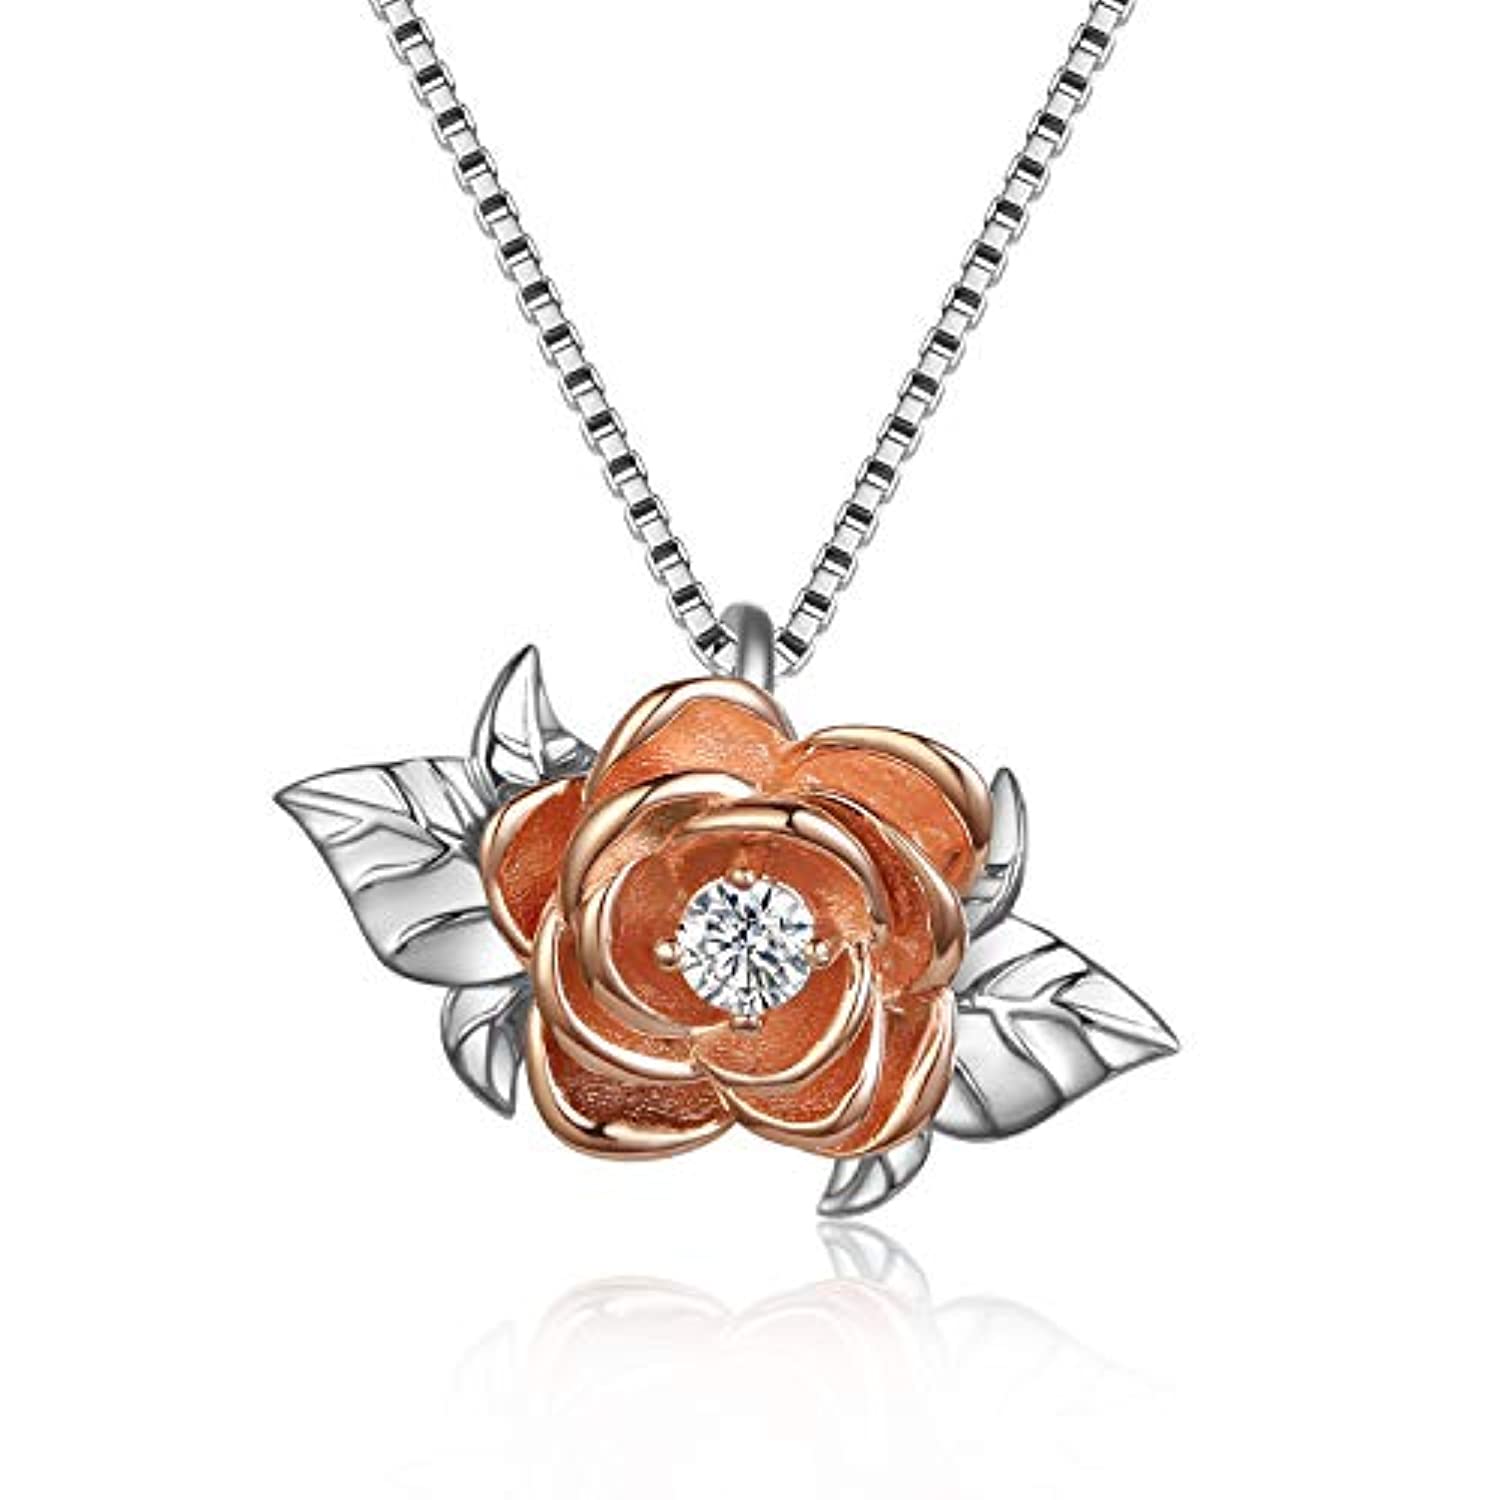 Brilliance Fine Jewelry Women's Rose Pendant in Two Tone Sterling Silver  with 14KT Gold Plate - Walmart.com